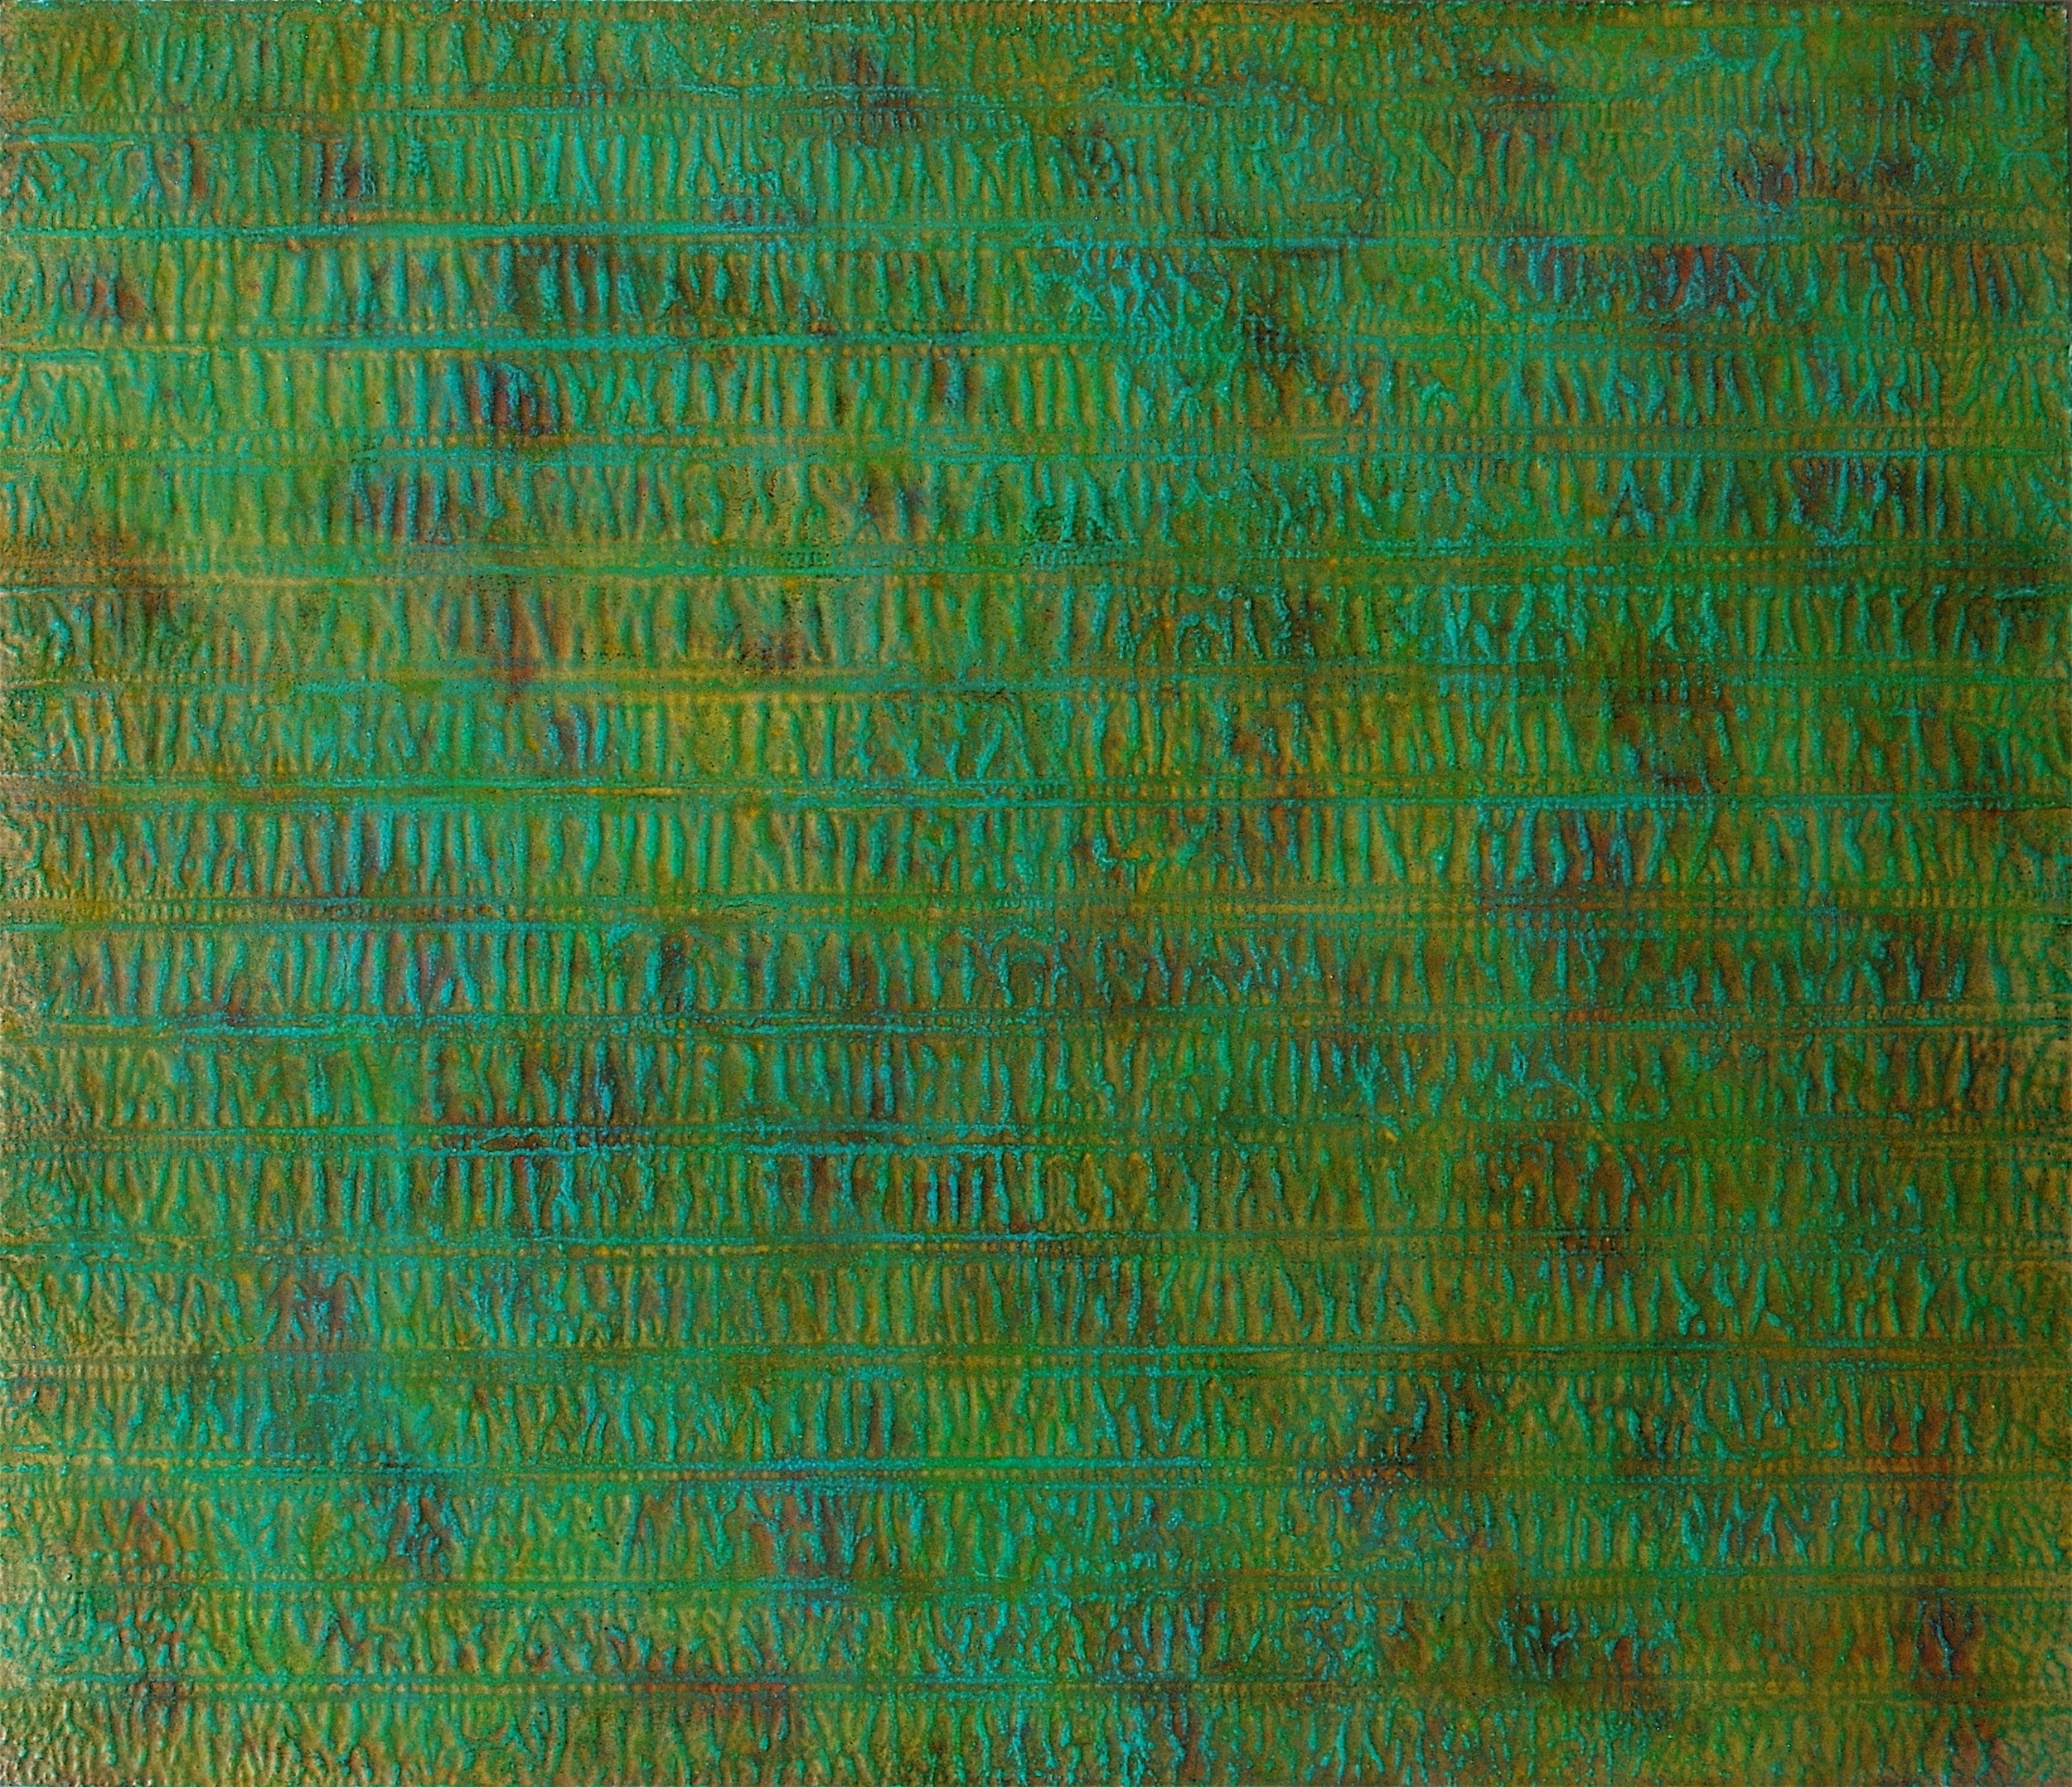 Julia King - Mysterious Writings #2, 36"h x 43"w x 1 3/4"d, oil on wood panel, raised gesso patterns, 23 kt. gold leaf